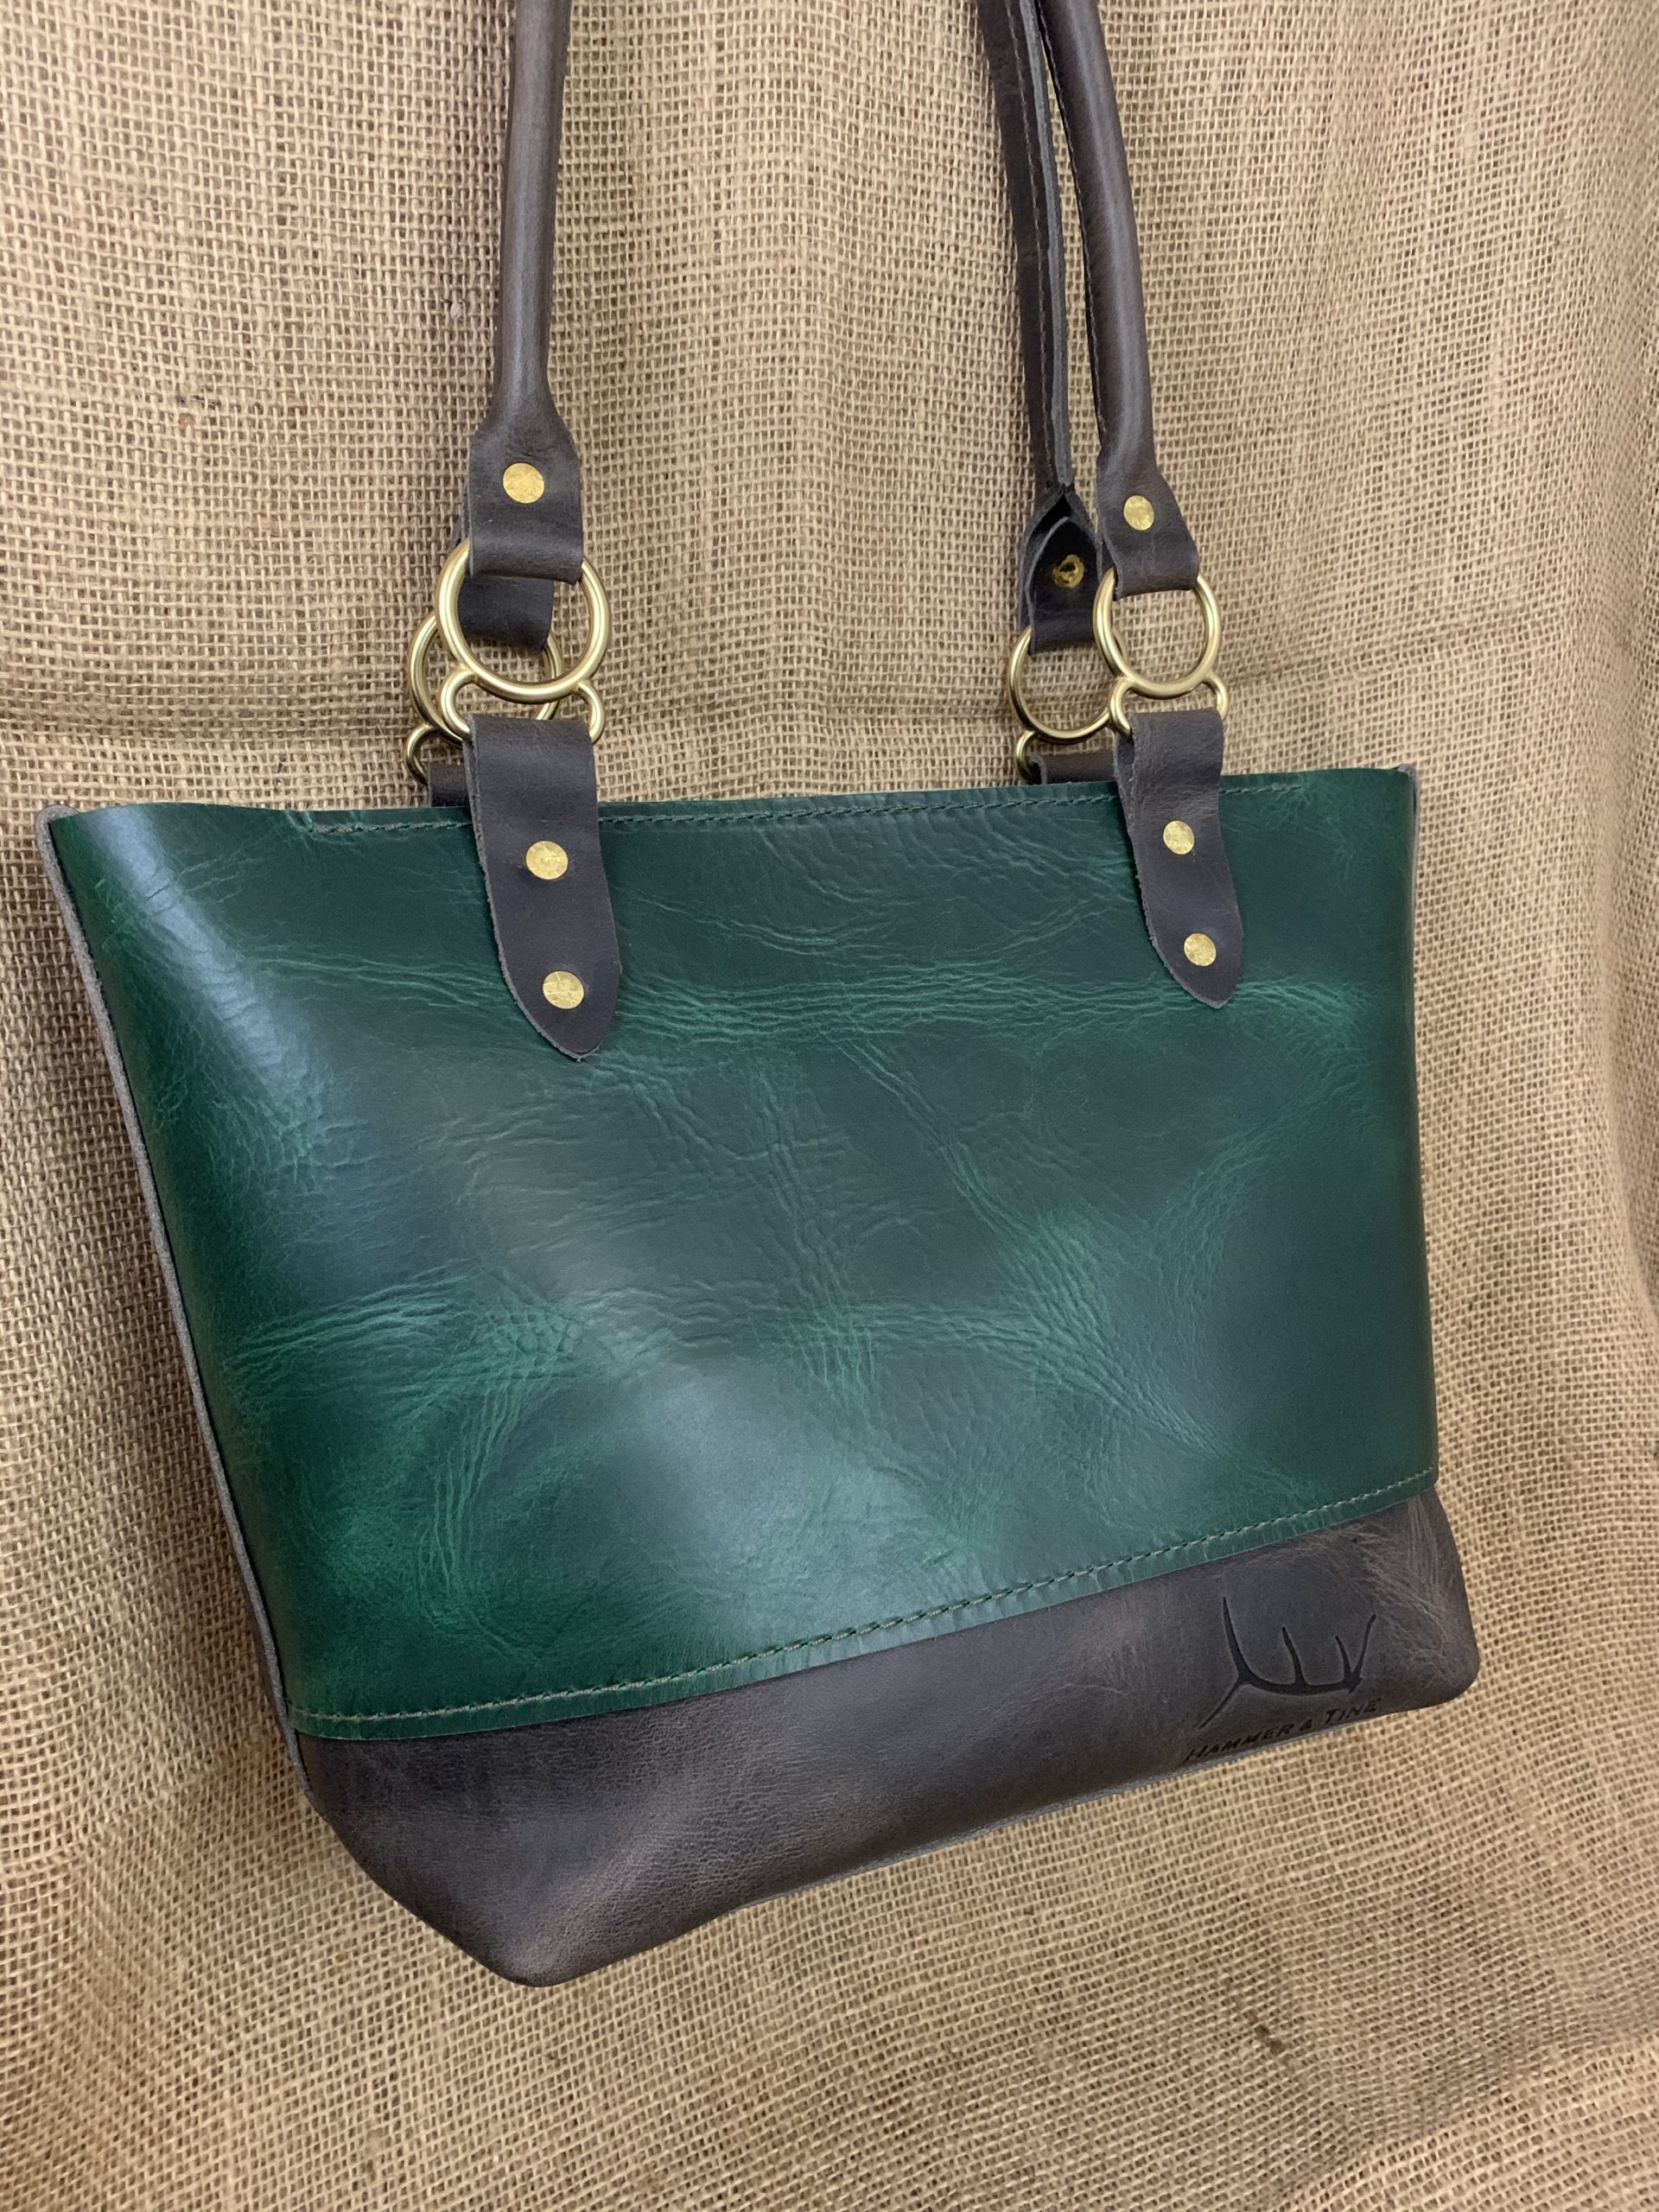 Medium Leather Tote - Green and Gray - Hammer & Tine - Leather Goods